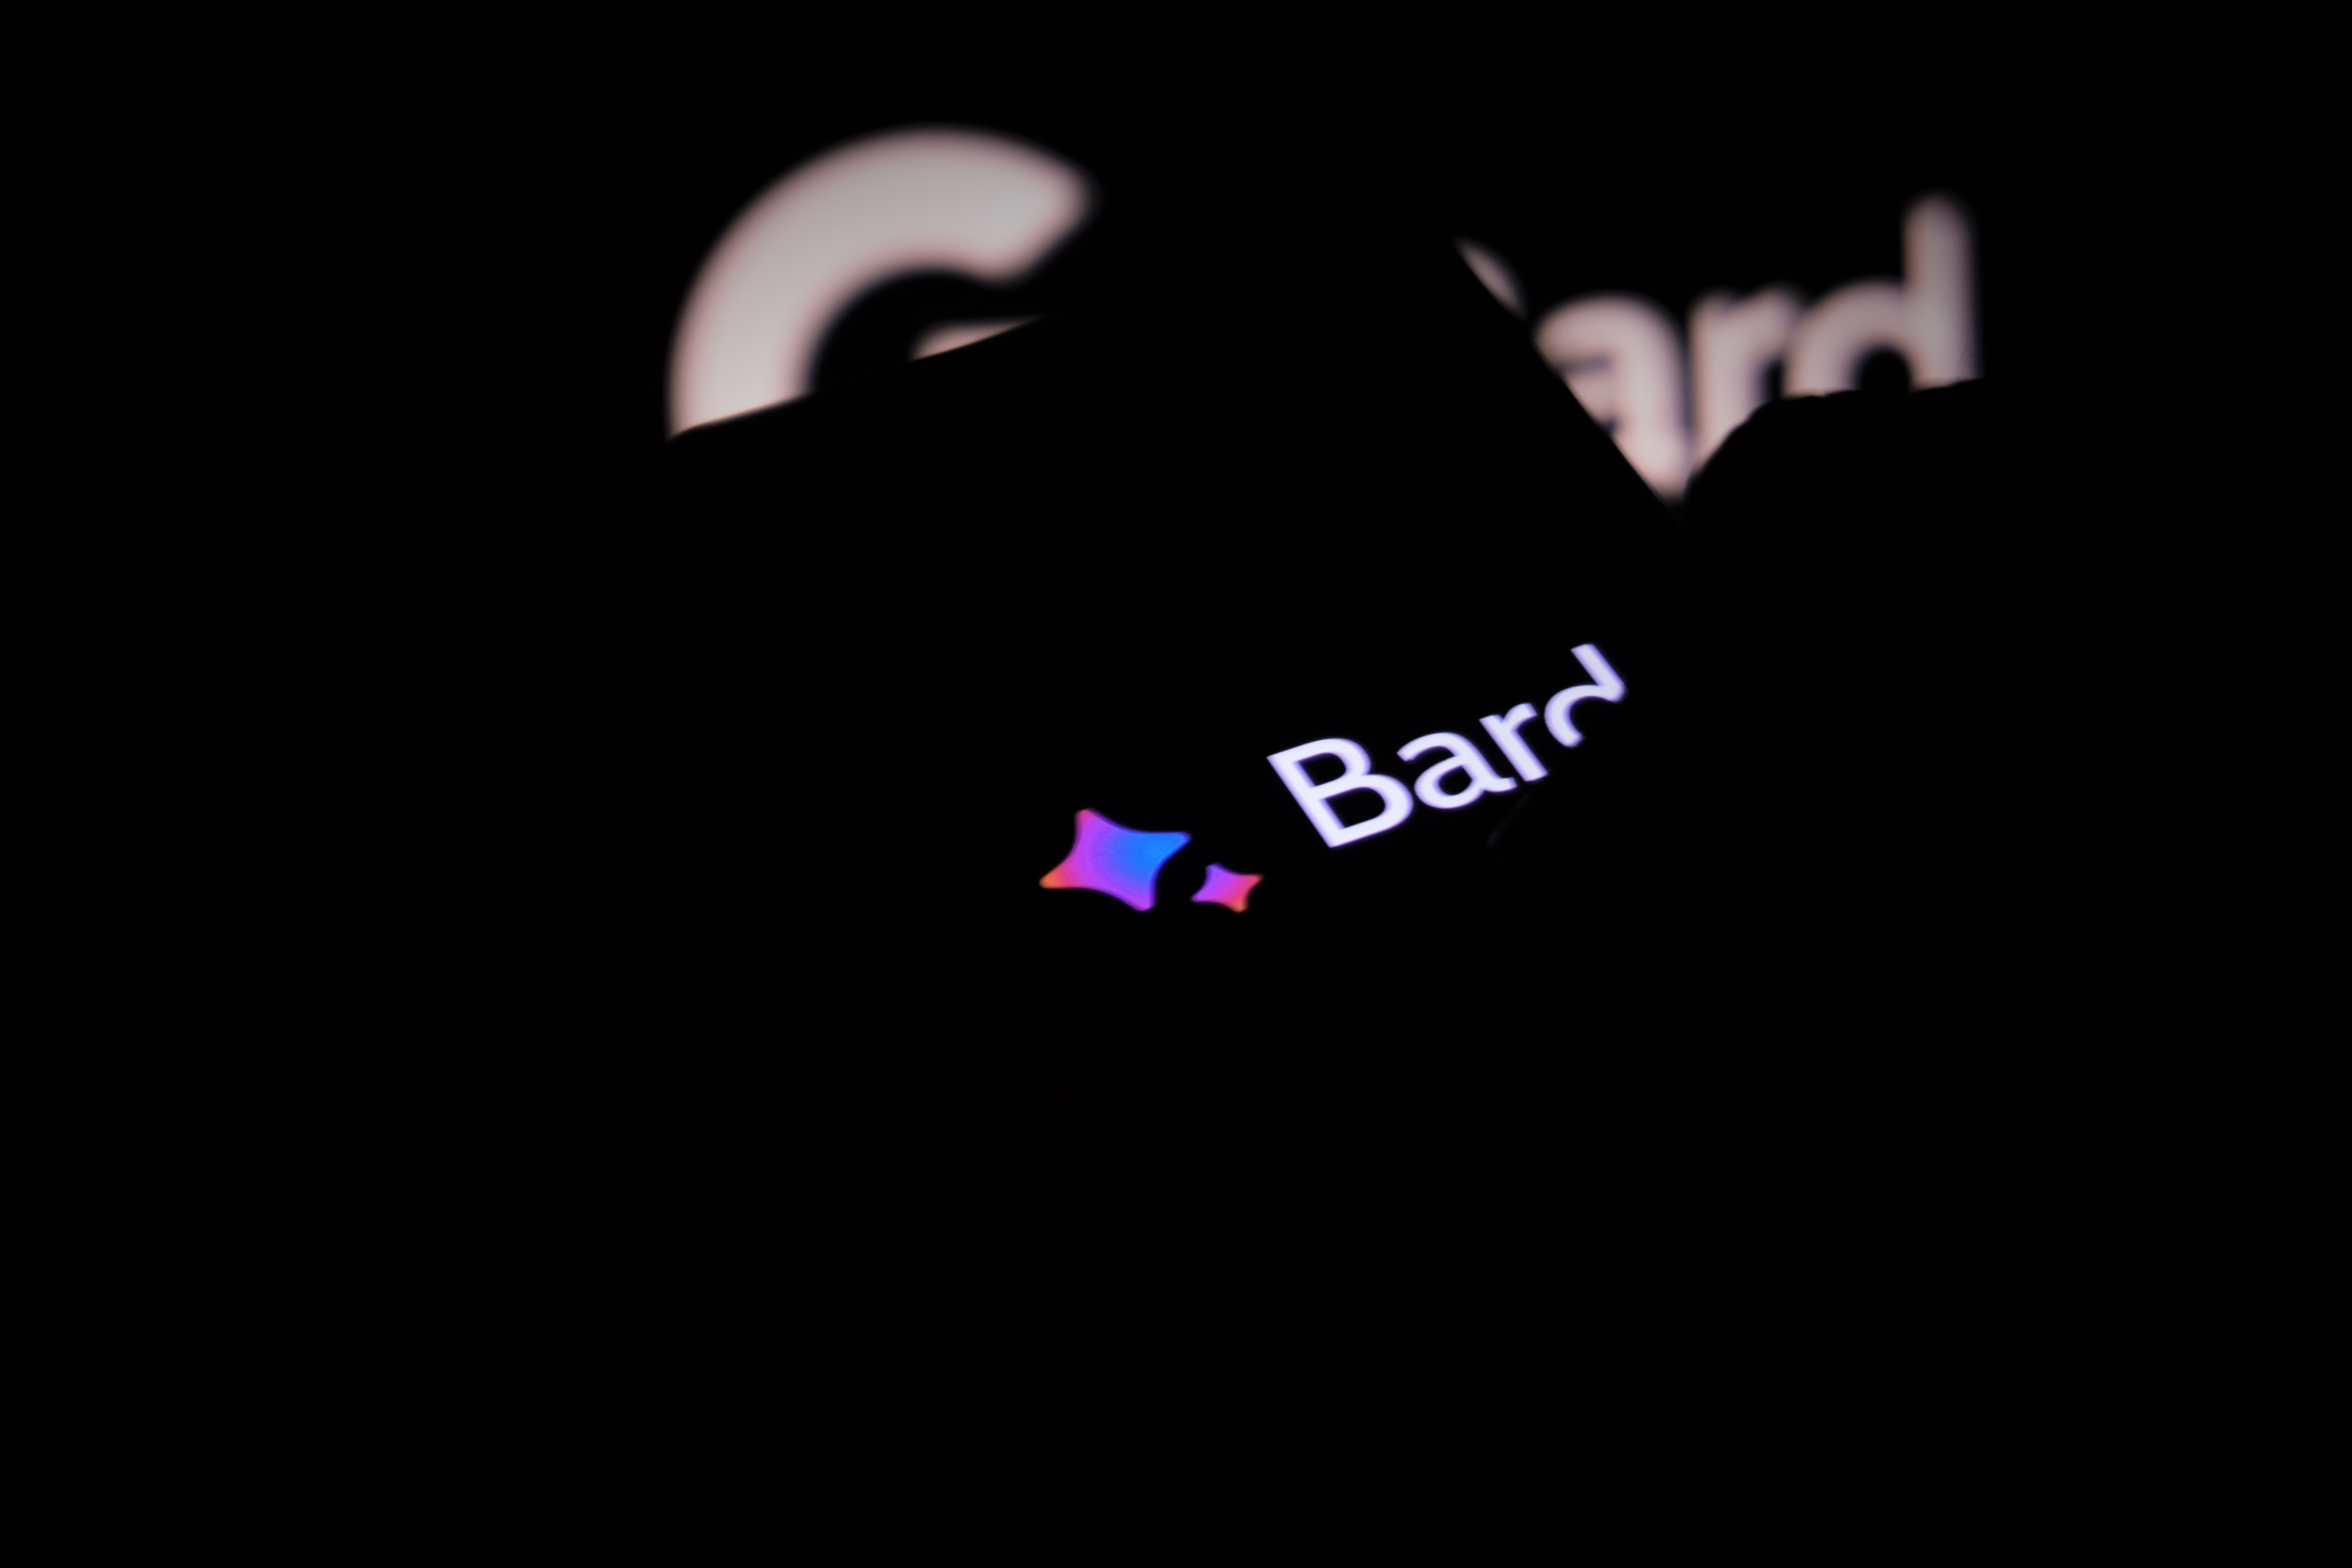 Google is developing a paid version of Bard with improved features